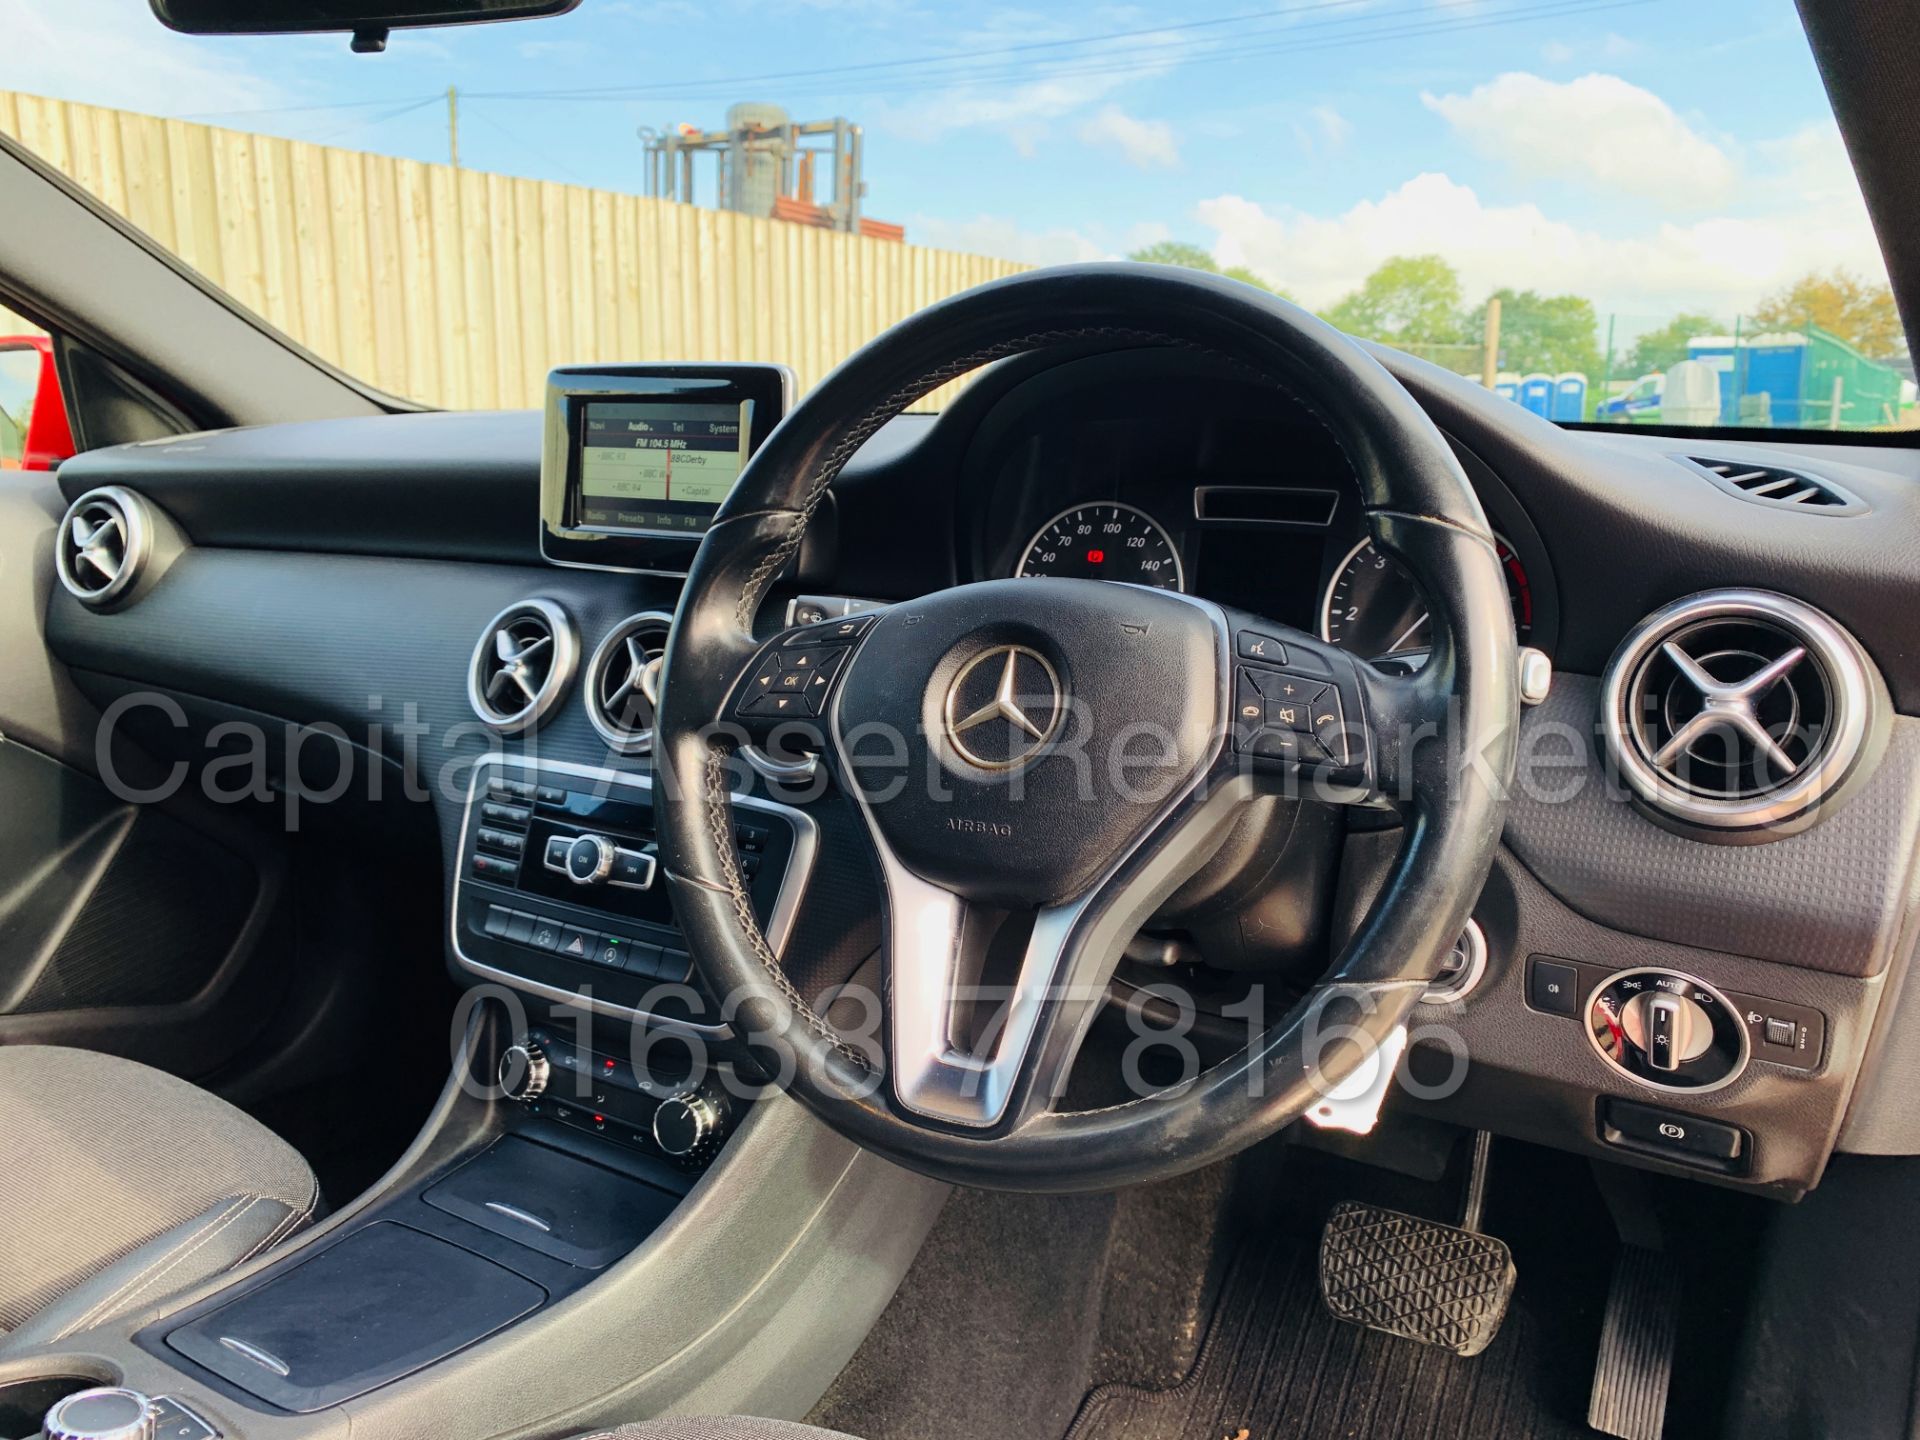 (ON SALE) MERCEDES-BENZ A180 *5 DOOR HATCHBACK* (2015 - NEW MODEL) '1.5 CDI - 7-G TRONIC AUTO' - Image 30 of 43